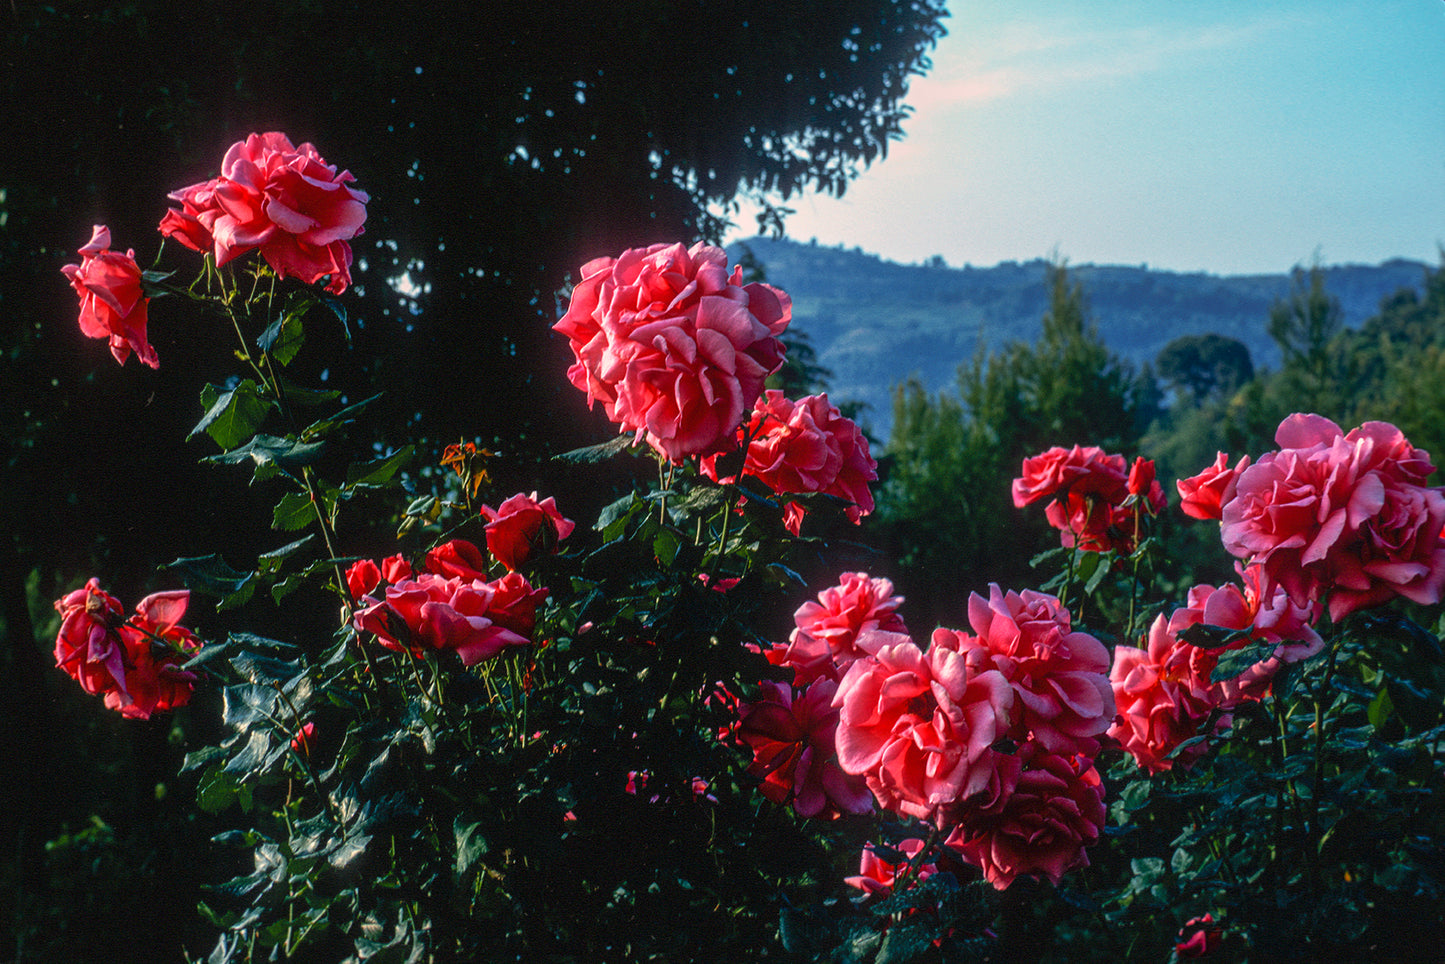 Peloponnese: Blooming roses somewhere in Laconia